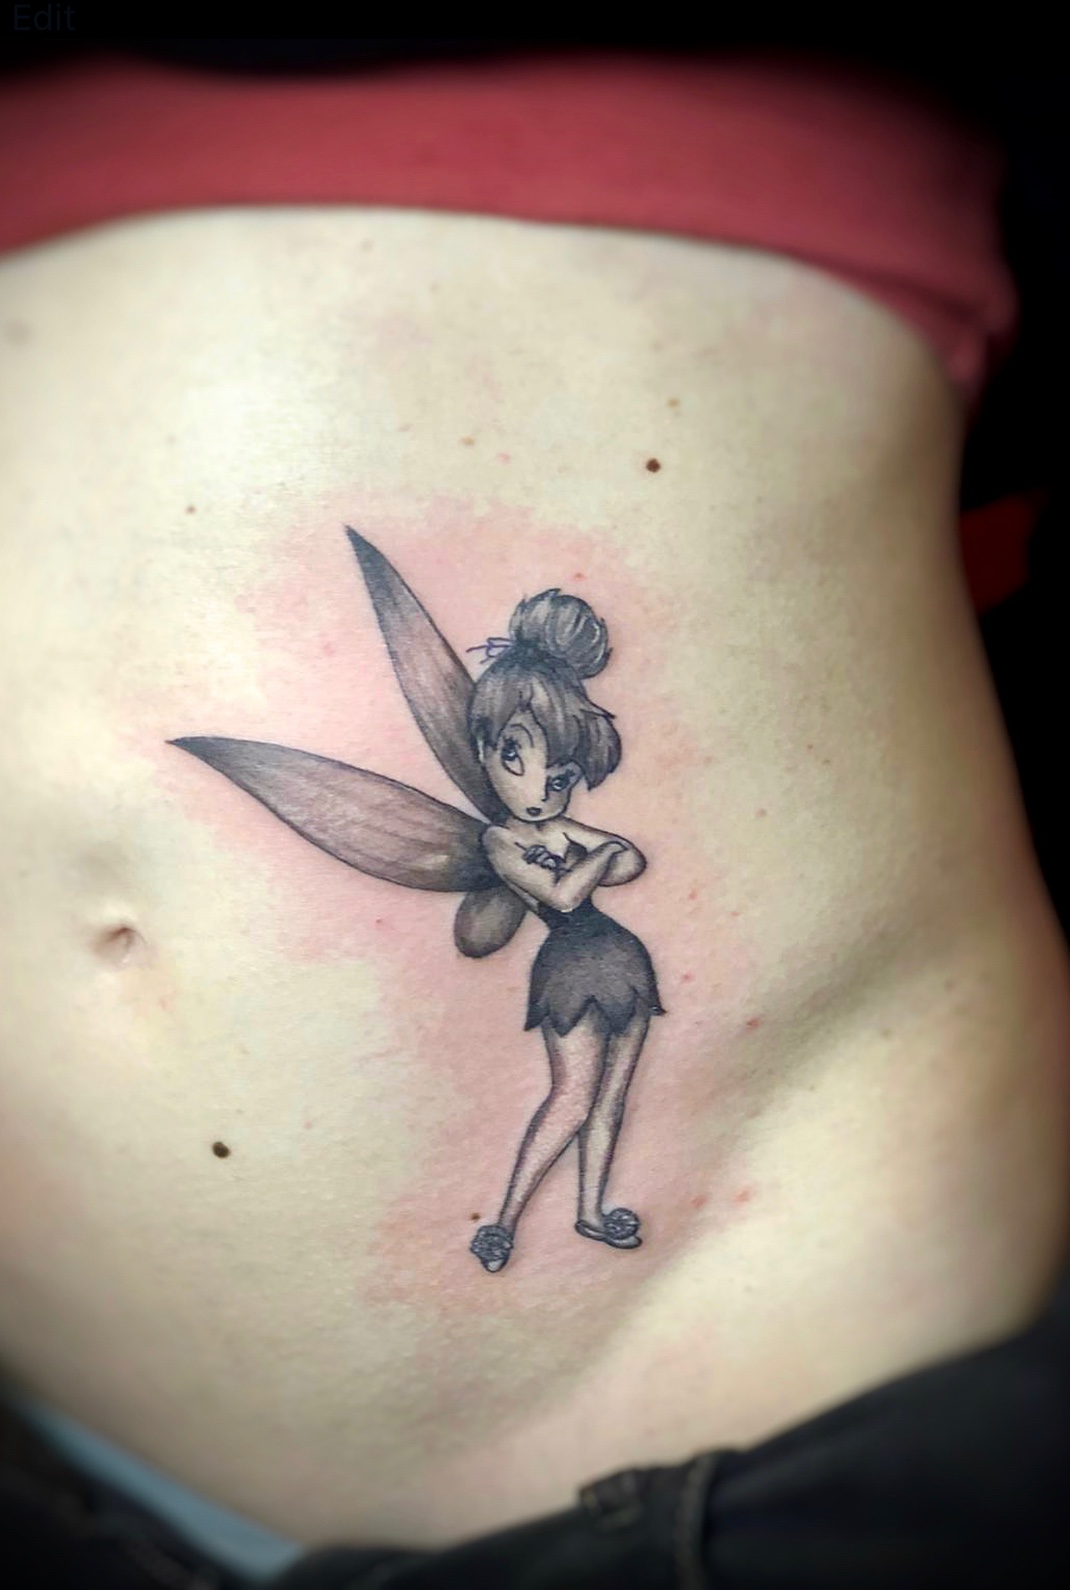 What does the tinkerbell tattoo mean